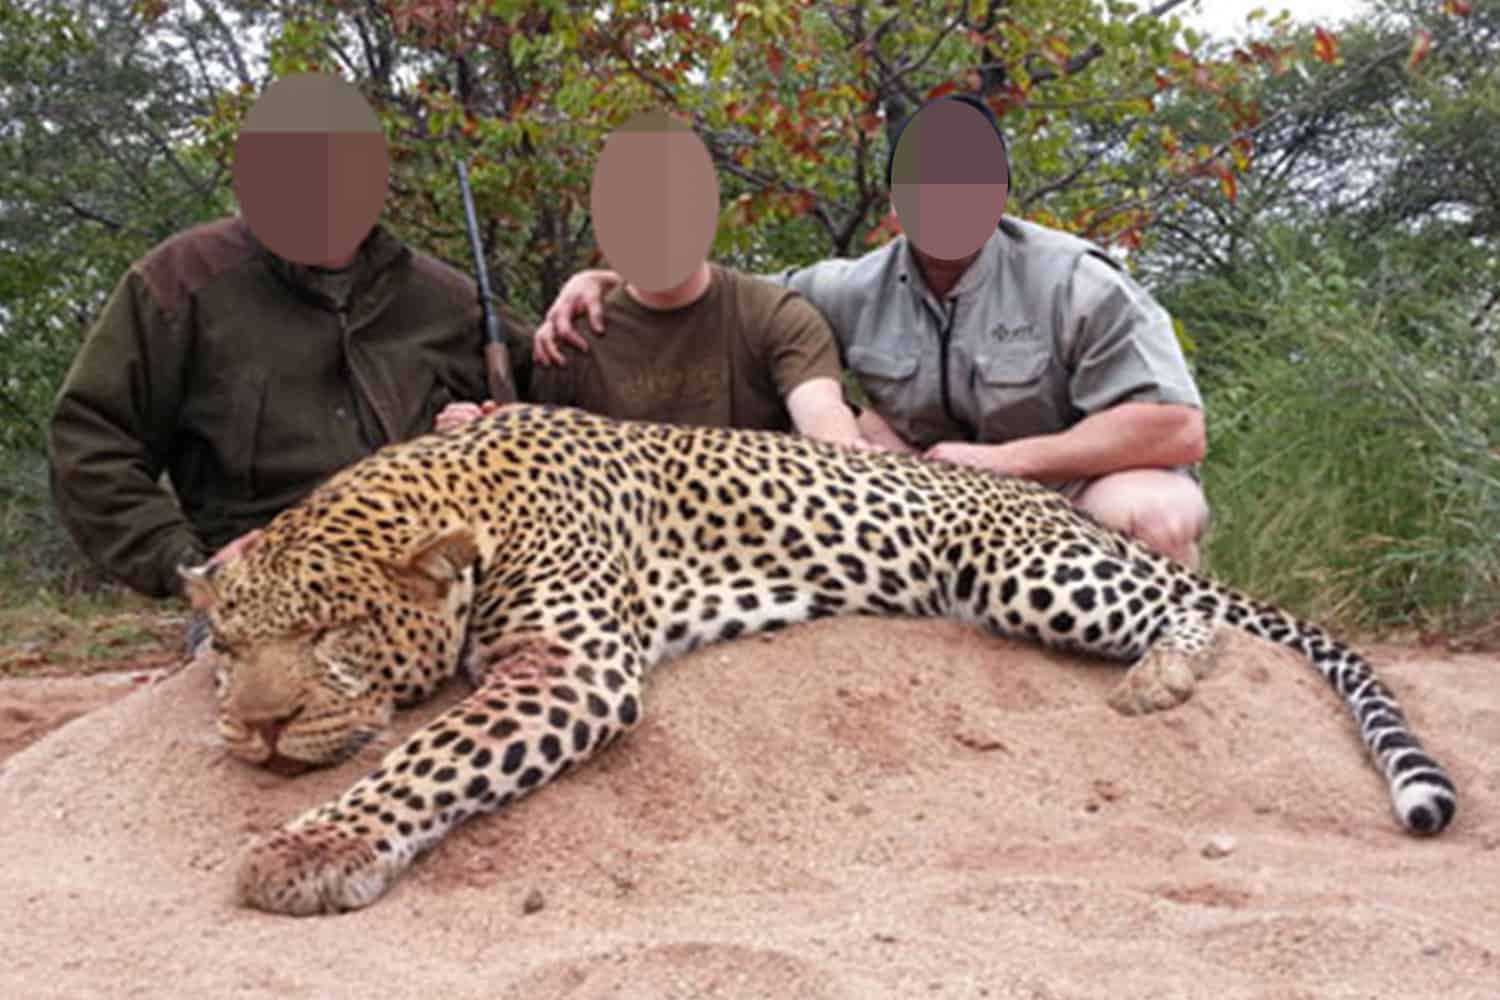 Killed for Fun - Evil trophy hunters ‘pay thousands to have leopards kneecapped to make them easier to hunt’